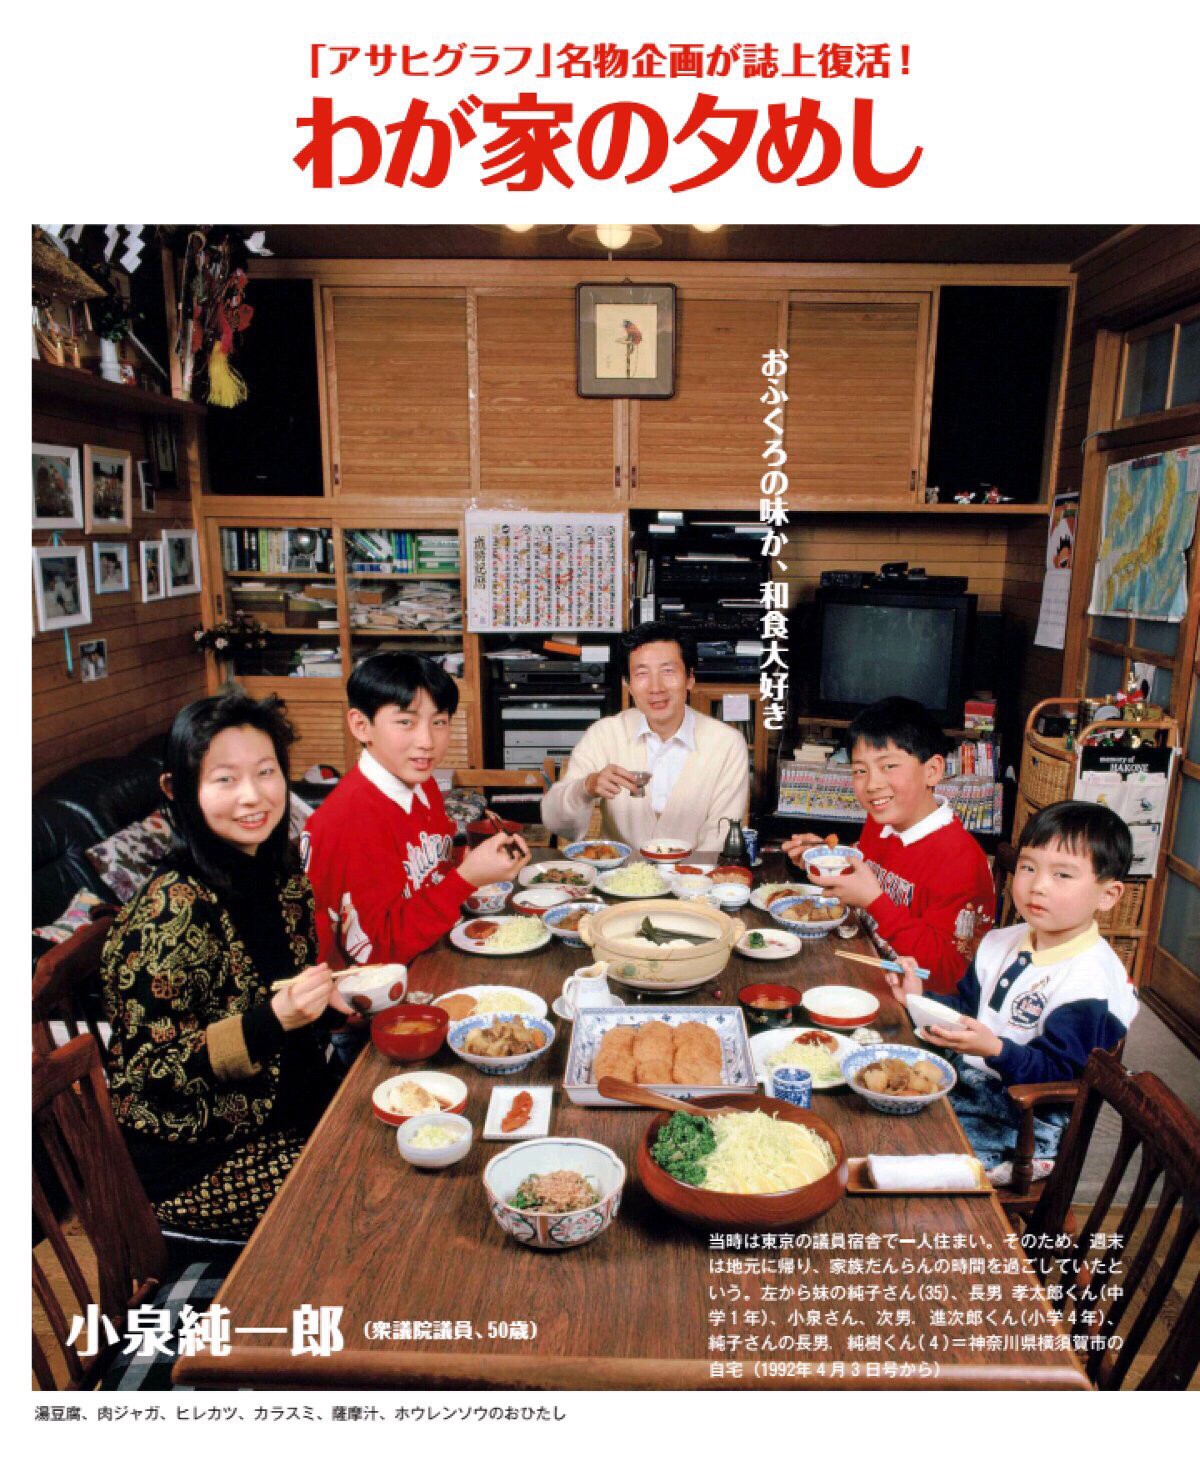 [Image] The general dinner of Showa is falling, the standard of living is falling w